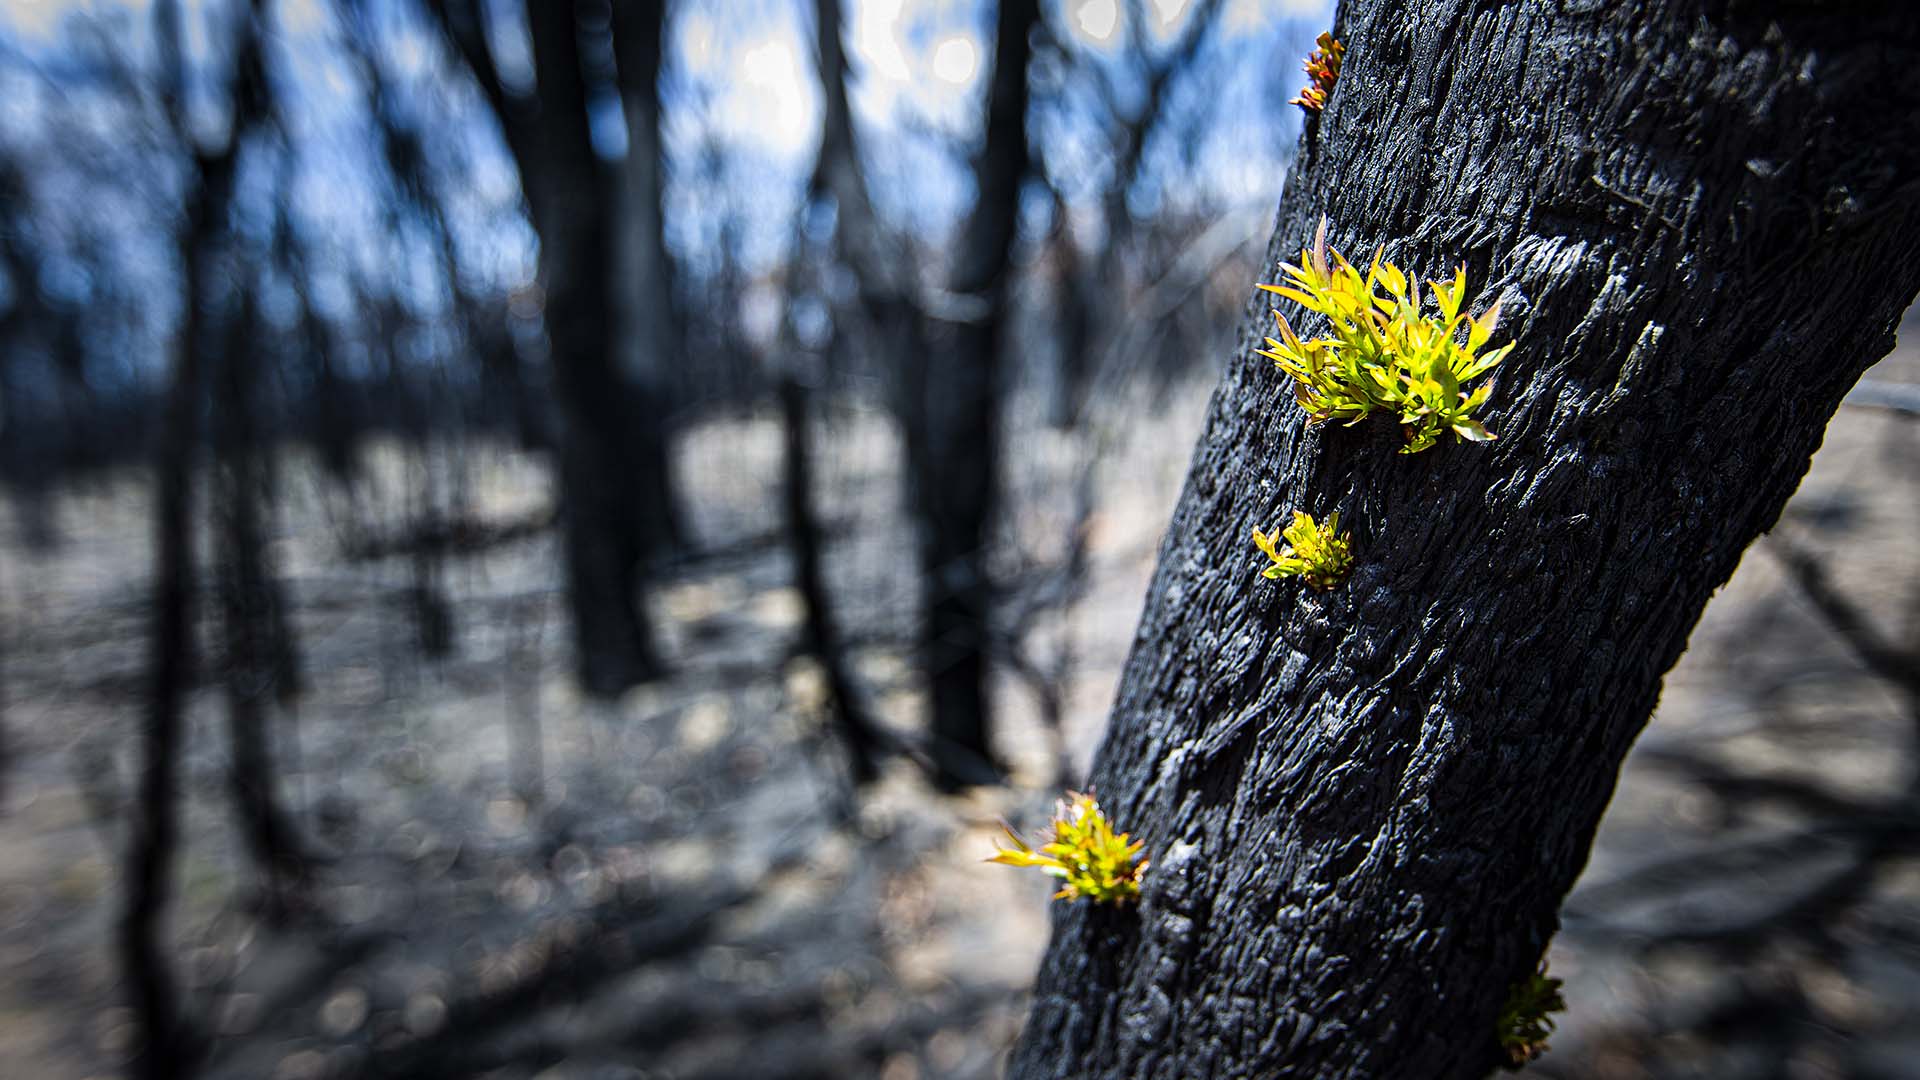 new growth showing on trees following a bushfire